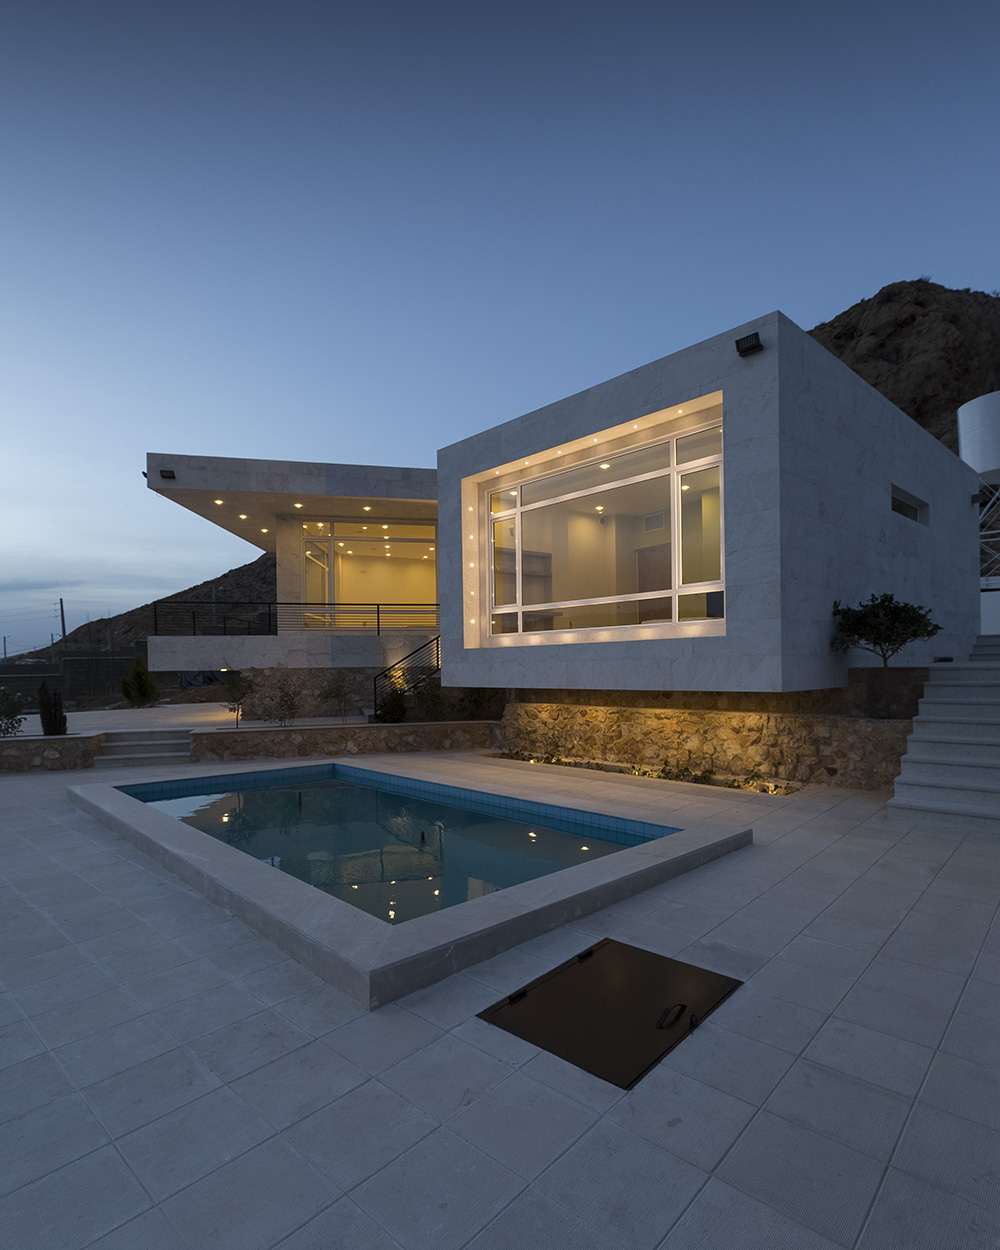 picture no. 3 ofVilla No. 02 project, designed by Ahmad Ghodsimanesh & Partners